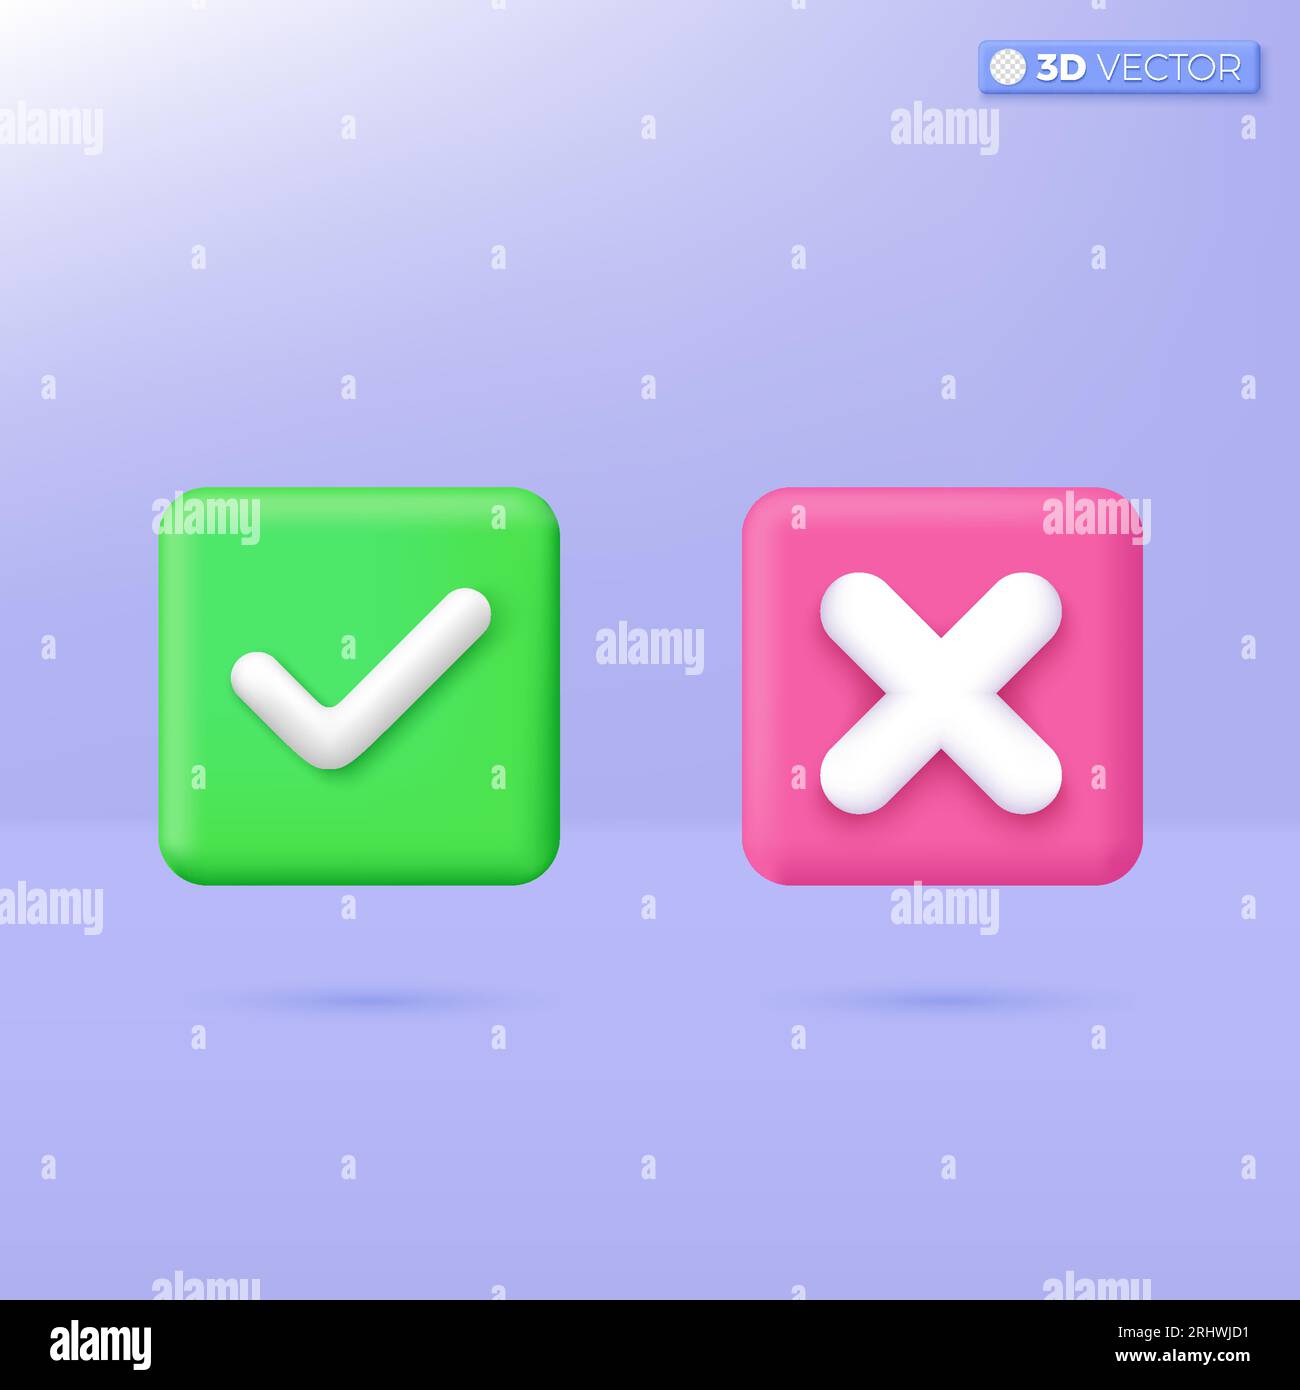 Right and Wrong icon symbols. check mark, cross mark, yes, accepted and rejected concept. 3D vector isolated illustration design Cartoon pastel Minima Stock Vector